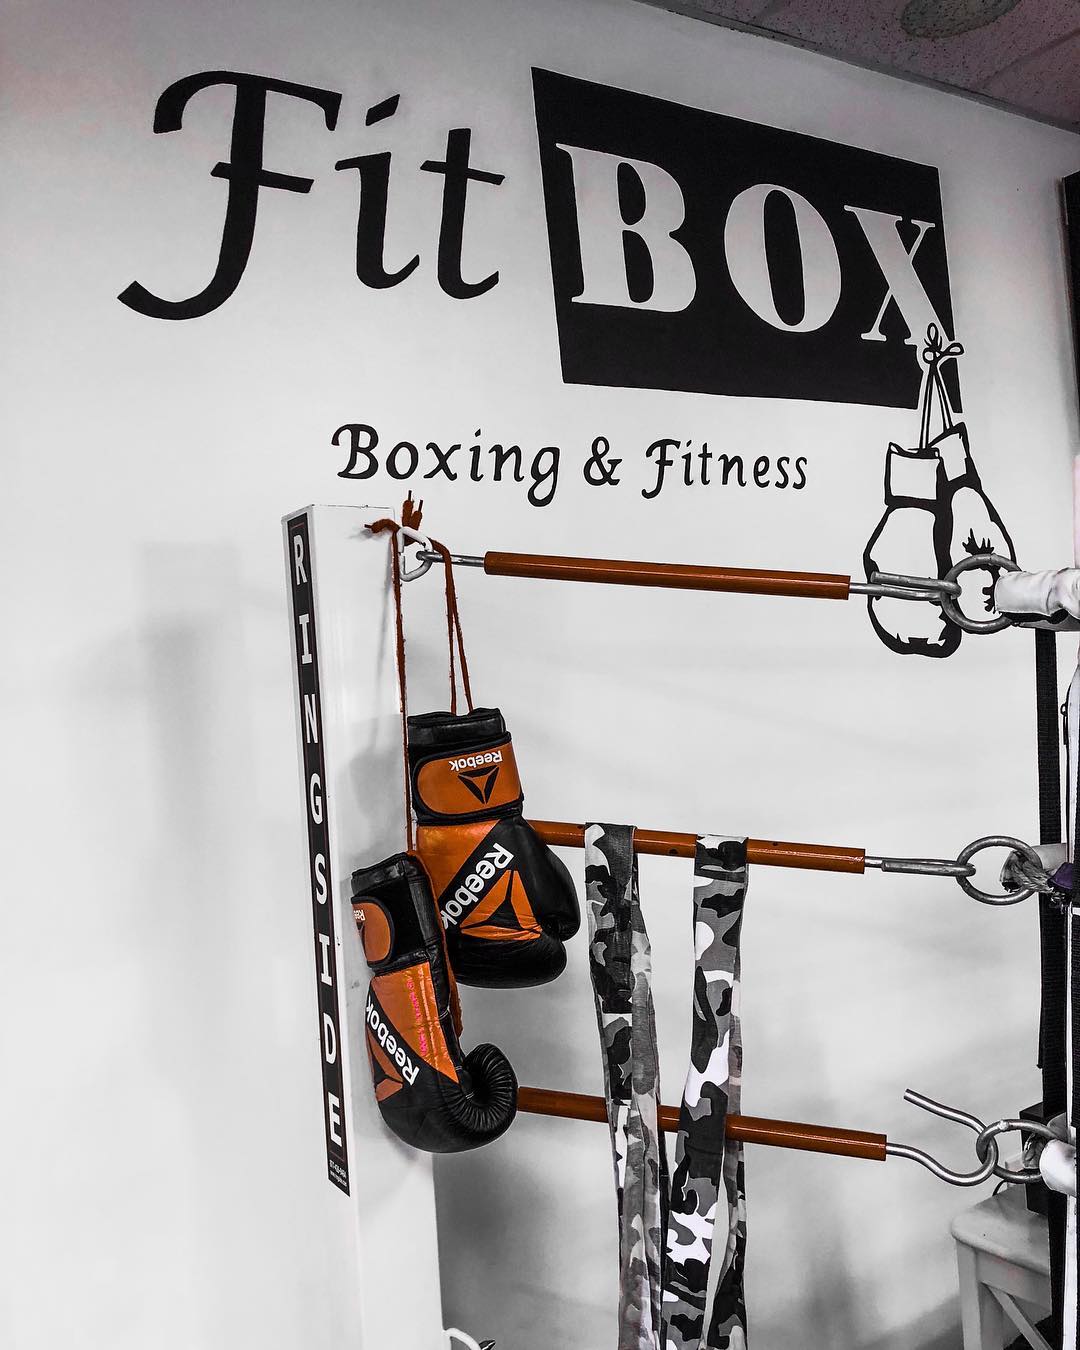 Sign up Today for a FREE Boxing Workout with Boxing trainer @tommymcinerney . Contact us at Text (781)727-9503 email fitbox@outlook.com @reebok @reebokboston